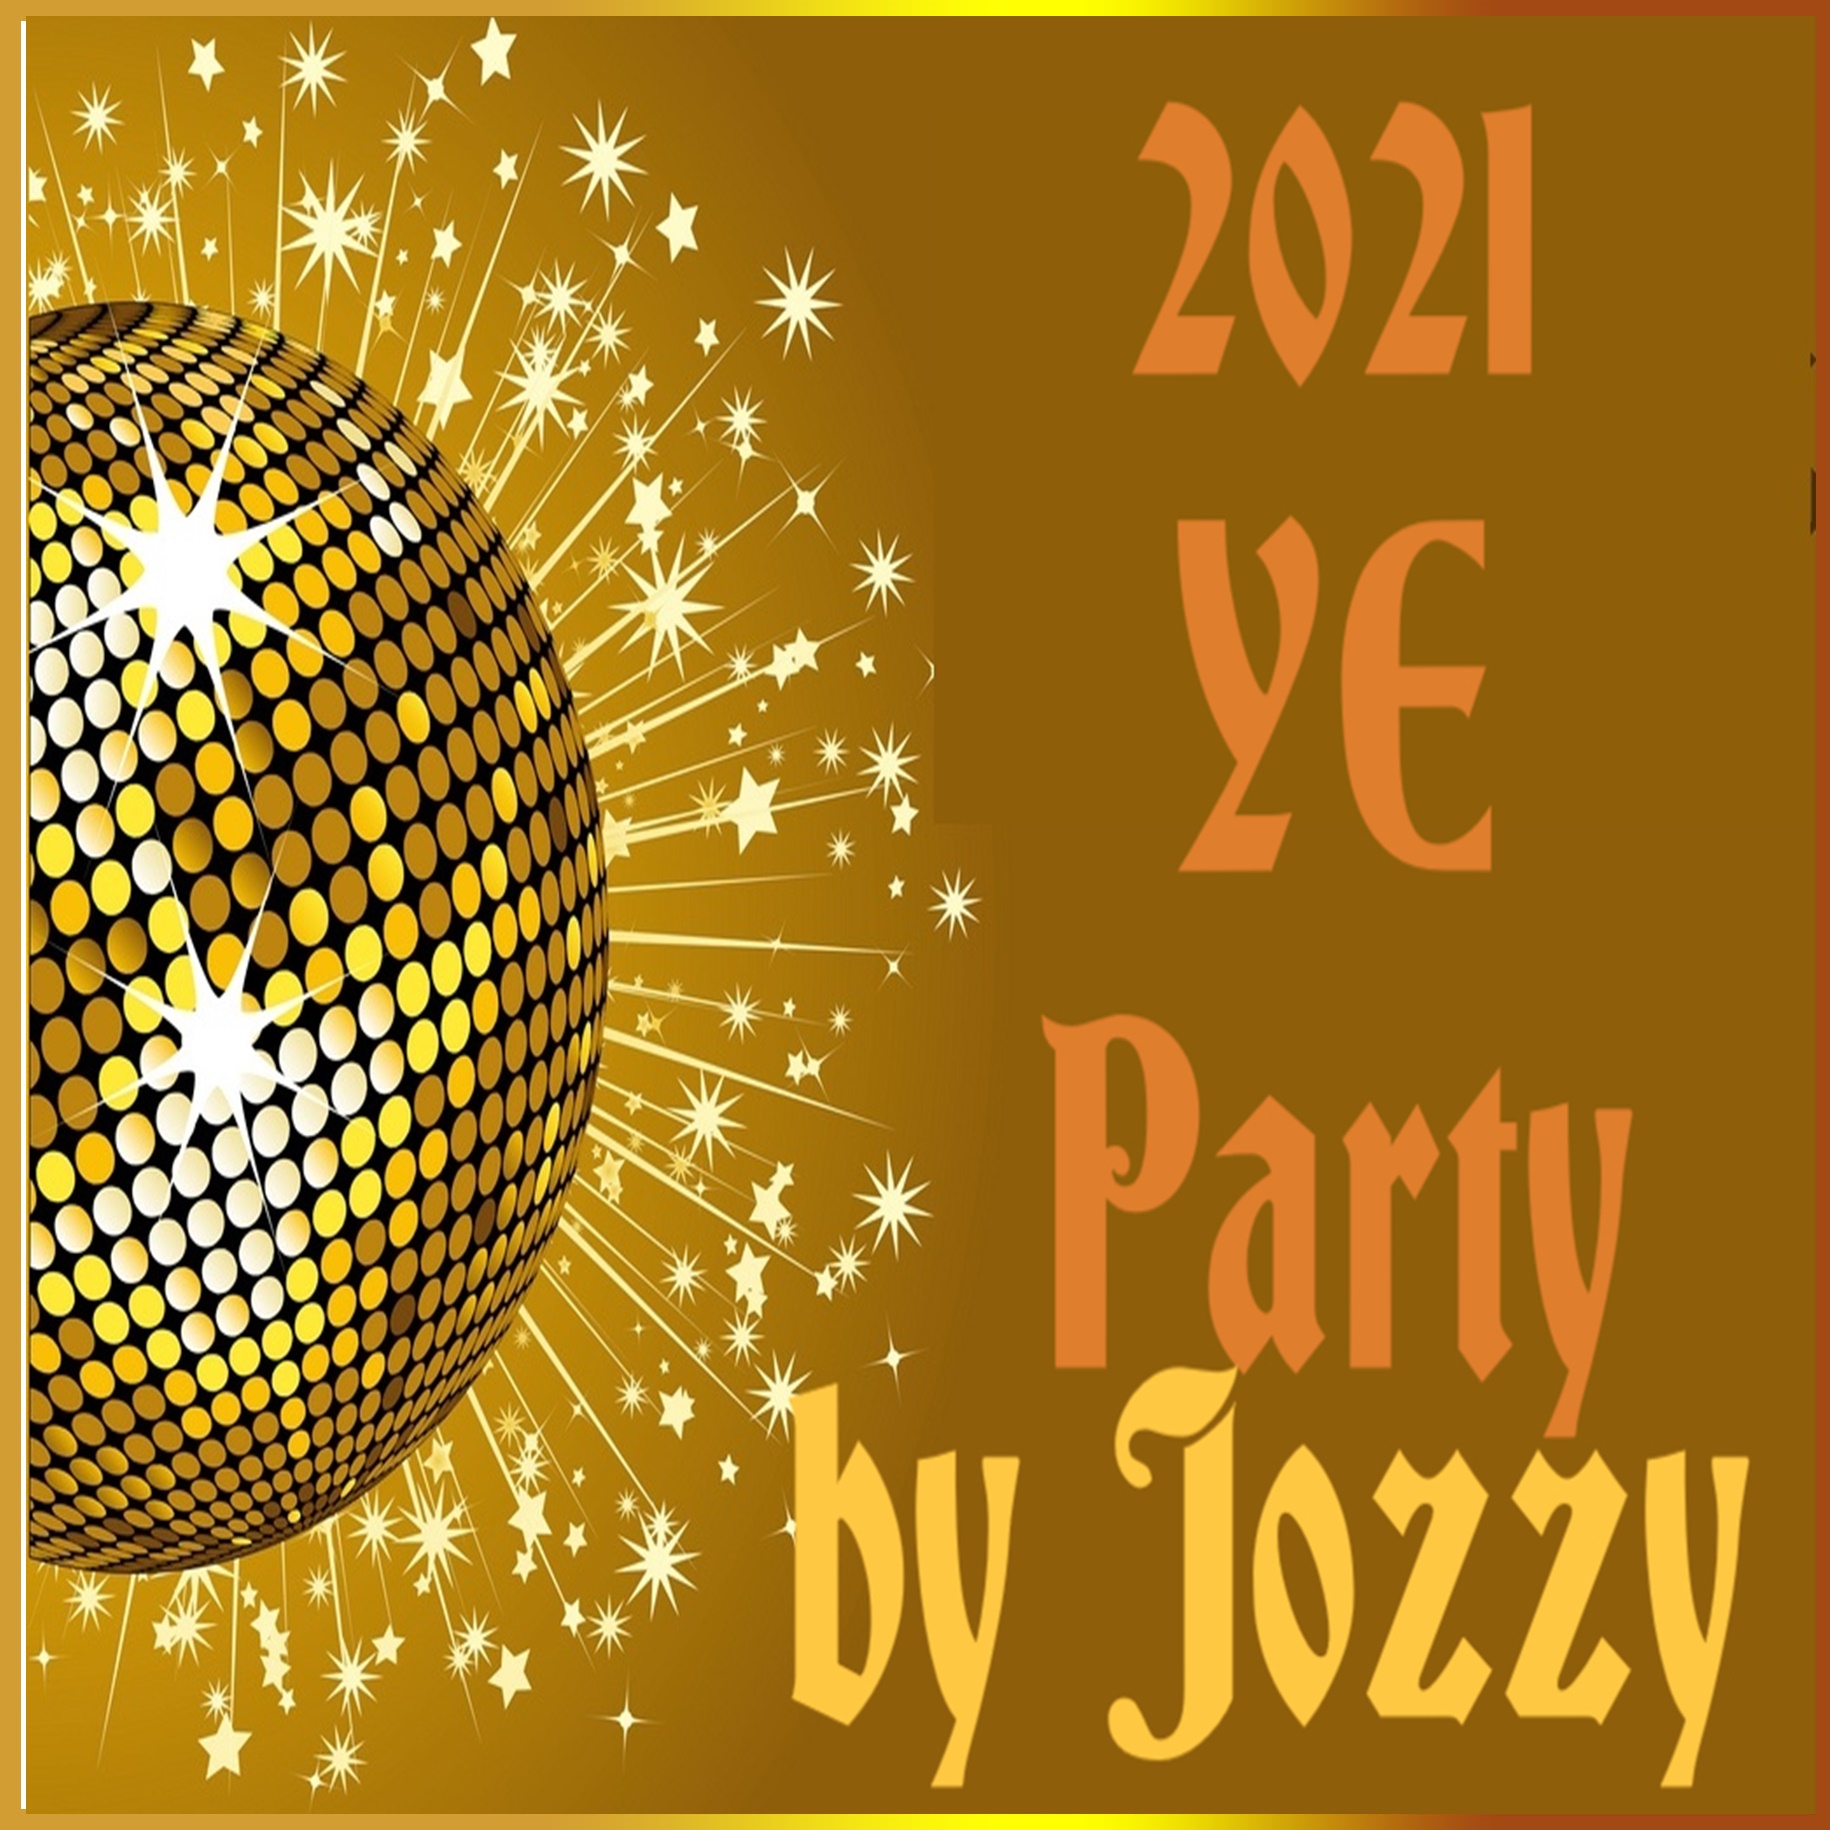 Jozzy - 2021 YE Party 3522_0a9c0dde80ee